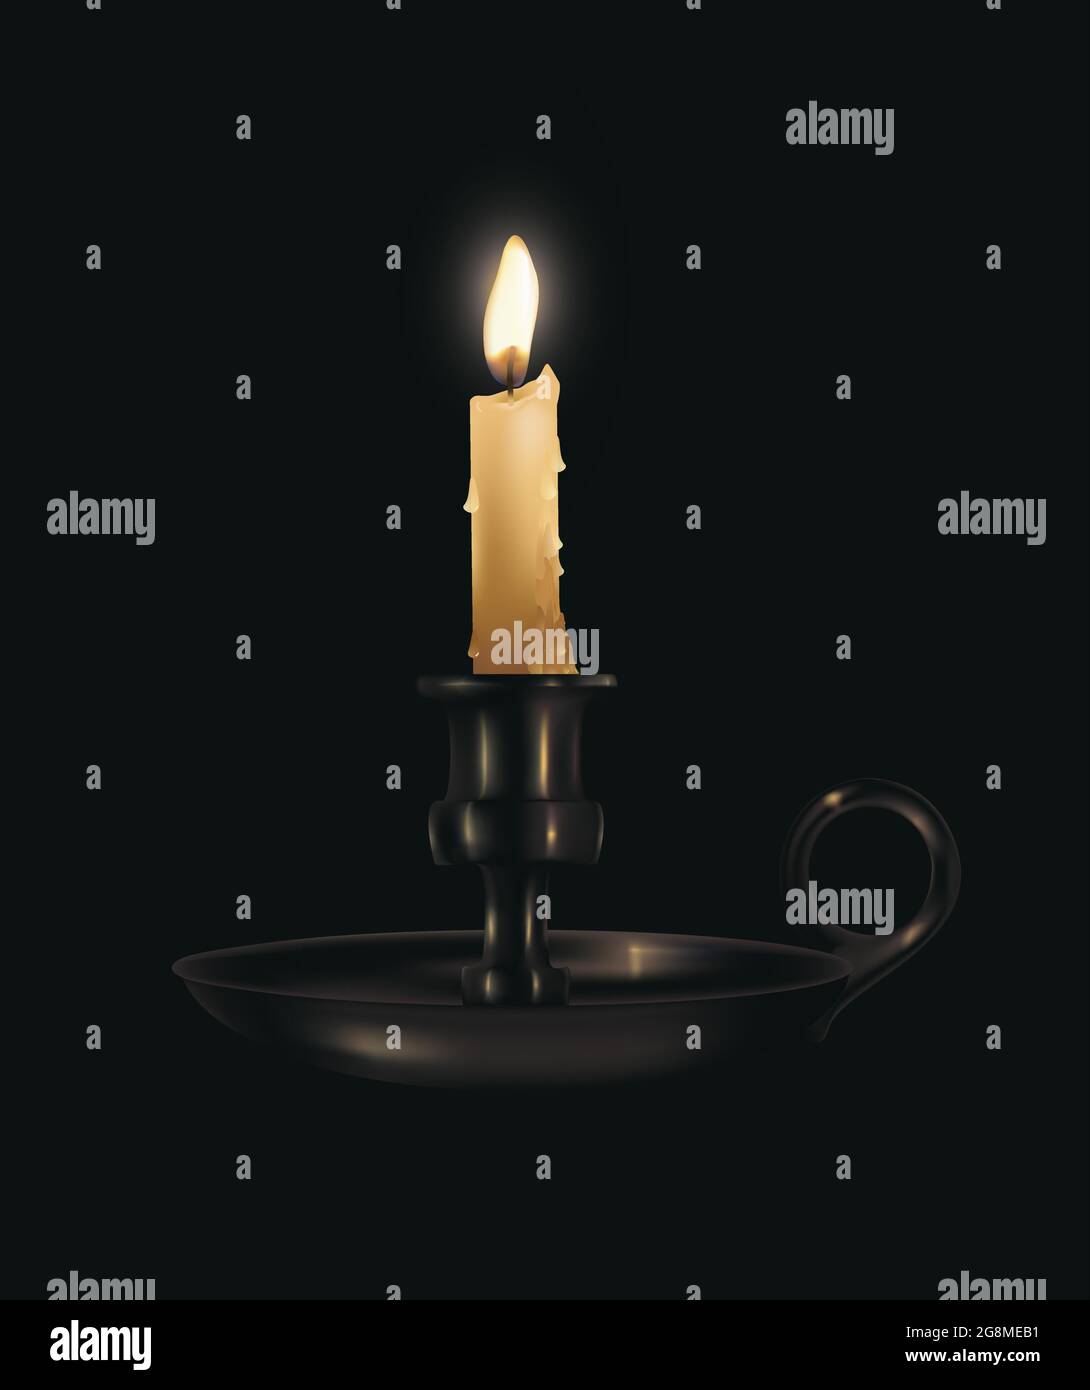 Realistic vector illustration of single lit candle in a holder against dark background Stock Vector